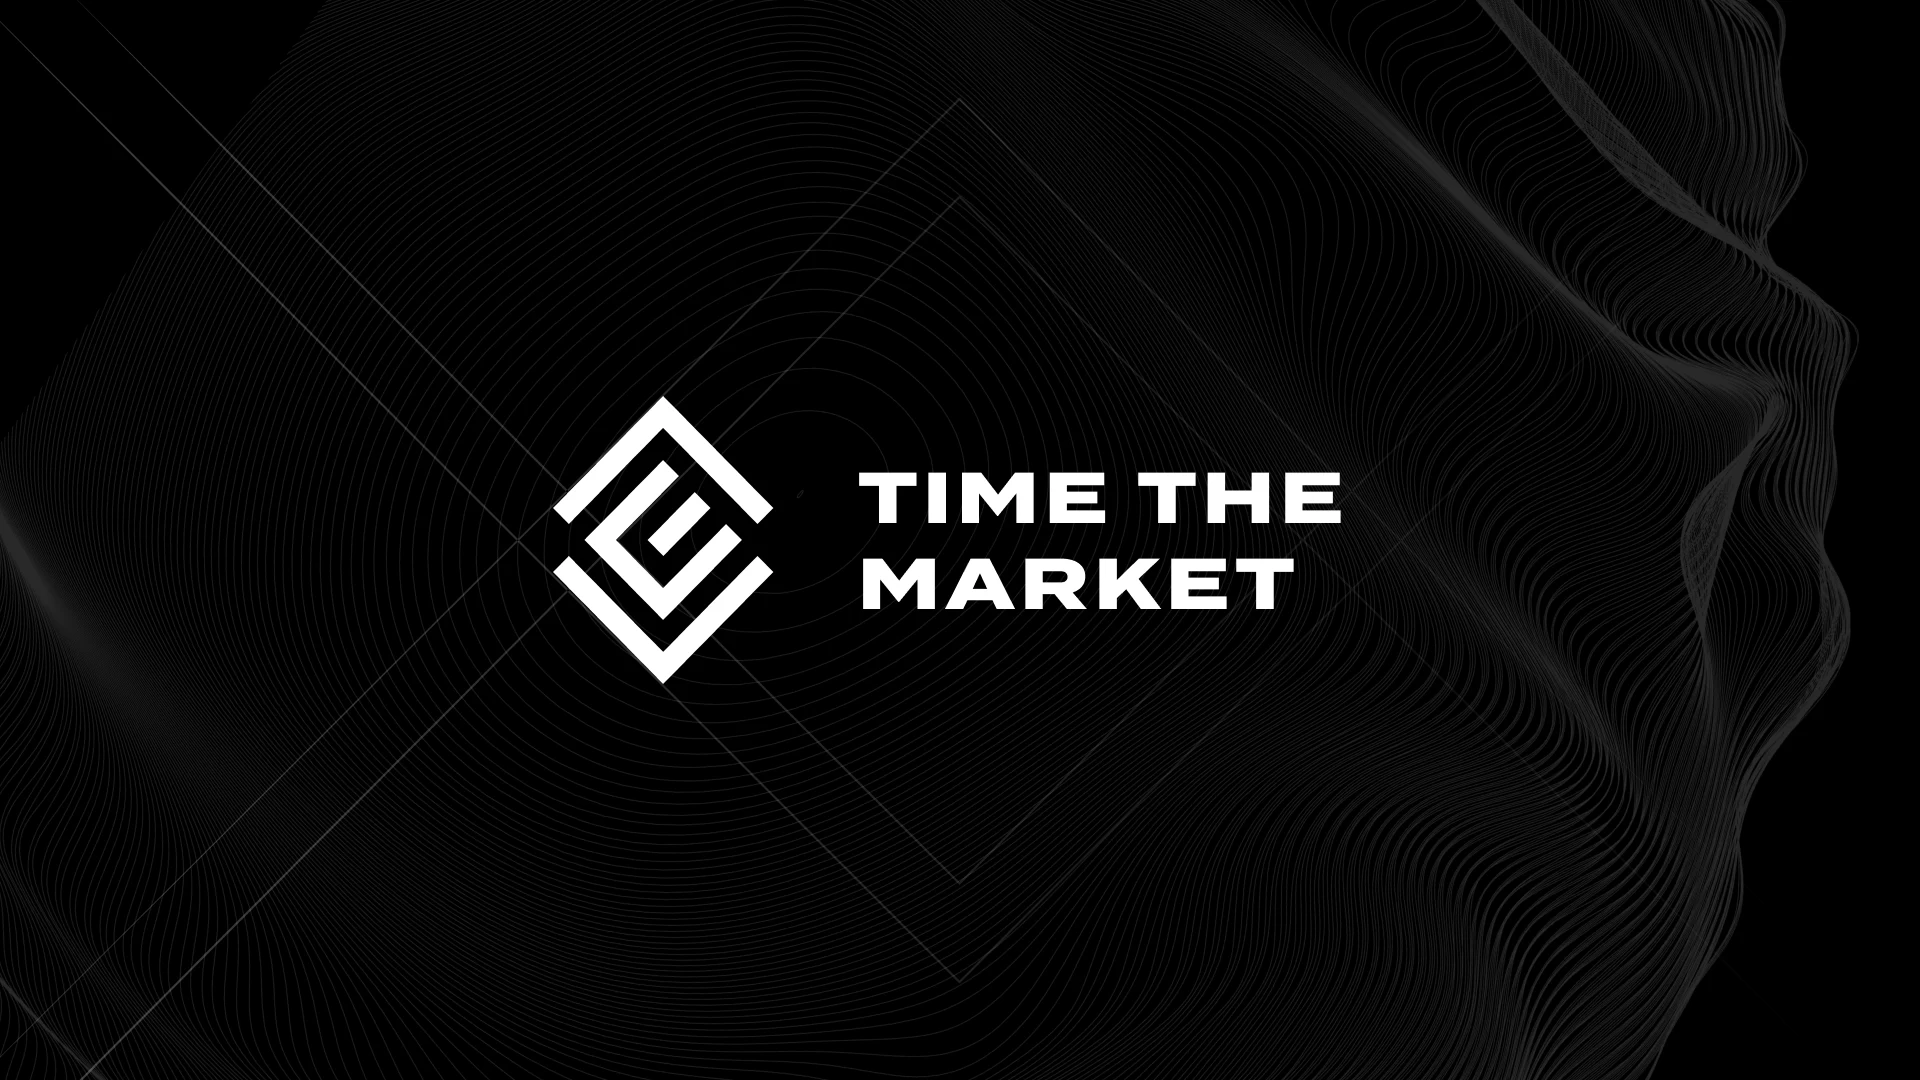 Logium logo with tagline "time the market"